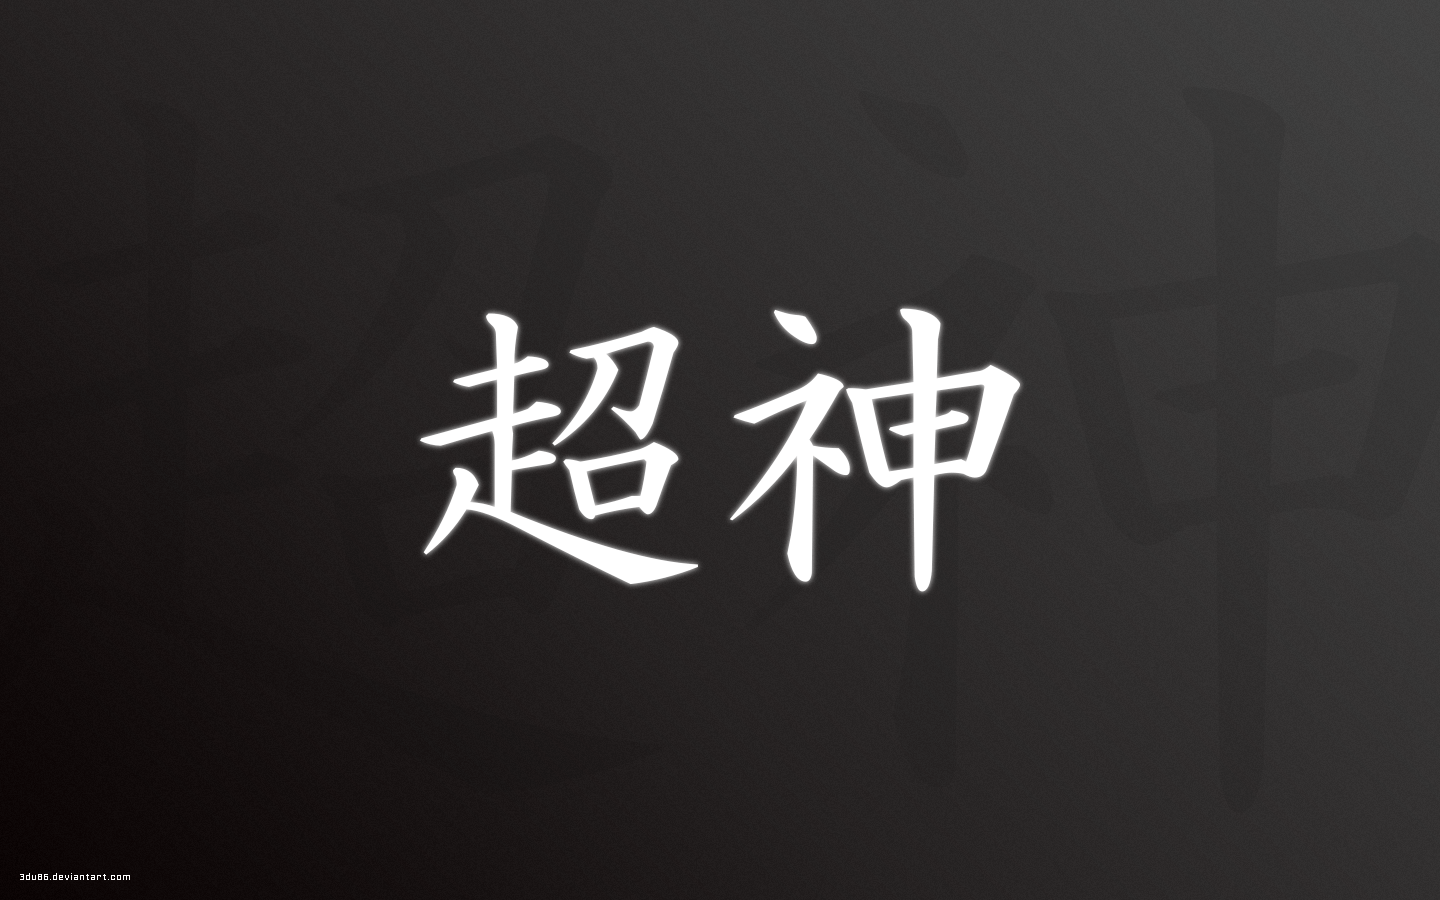 Japanese Writing Wallpapers Top Free Japanese Writing Backgrounds Wallpaperaccess